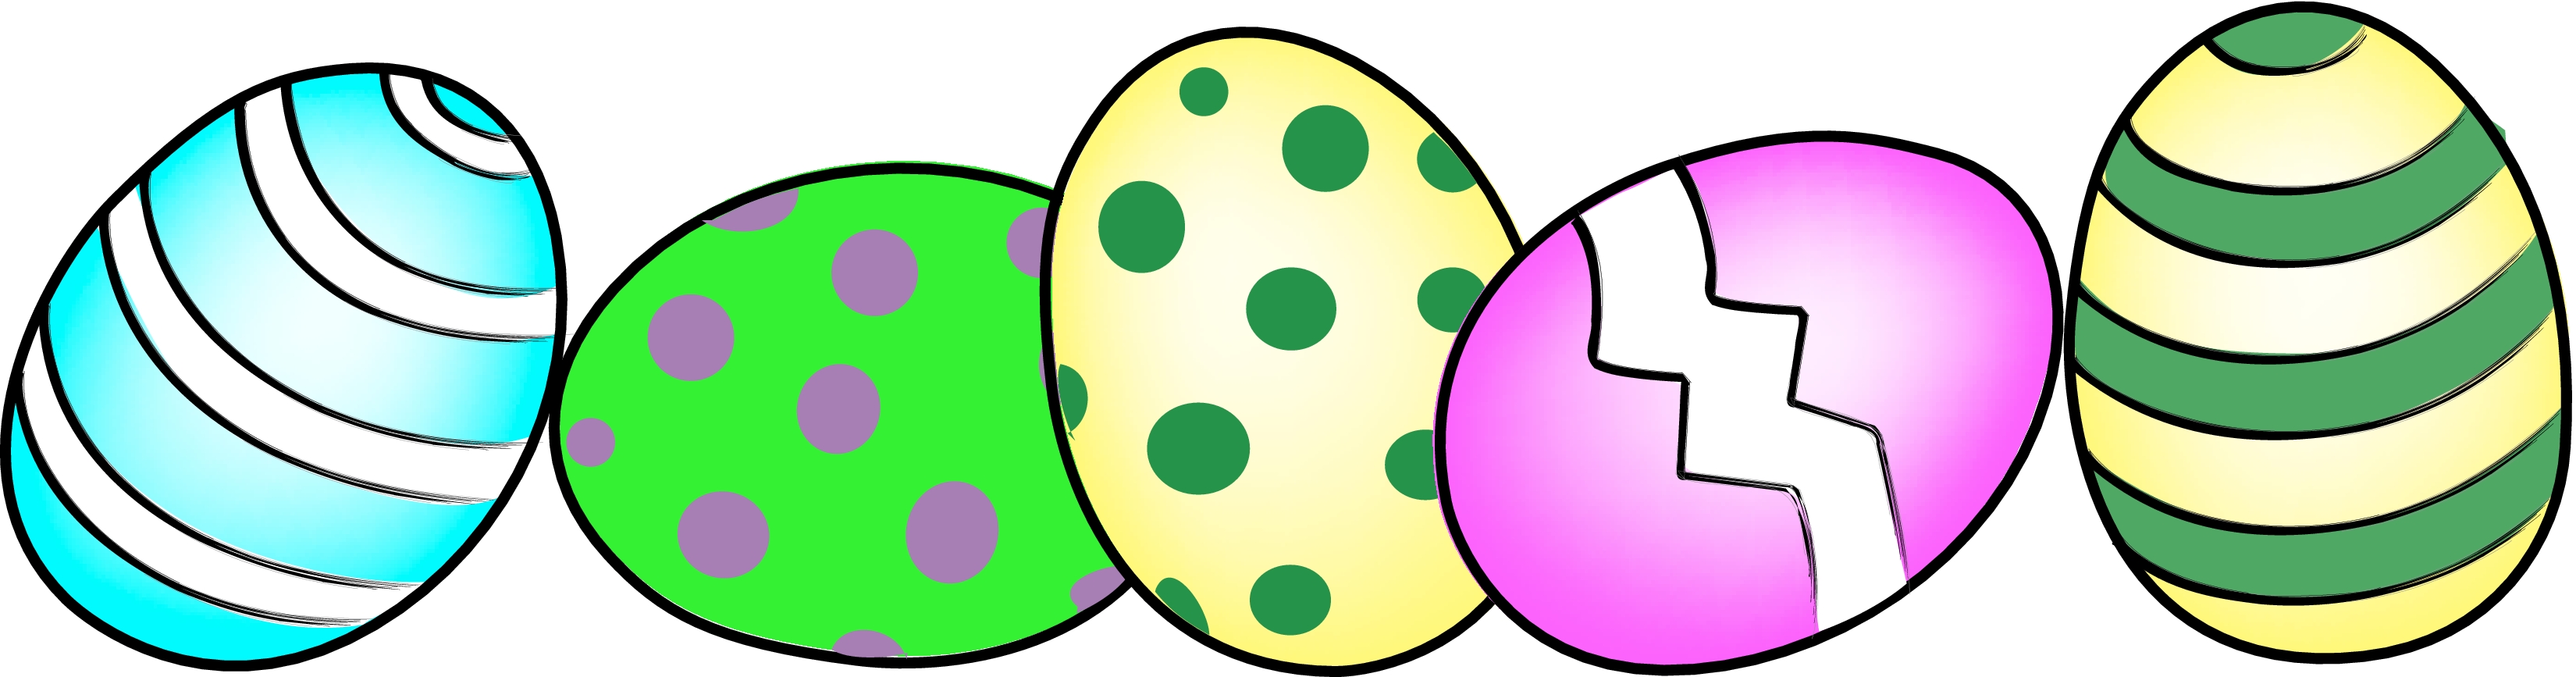 Easter Egg Clipart - Free Clipart Images